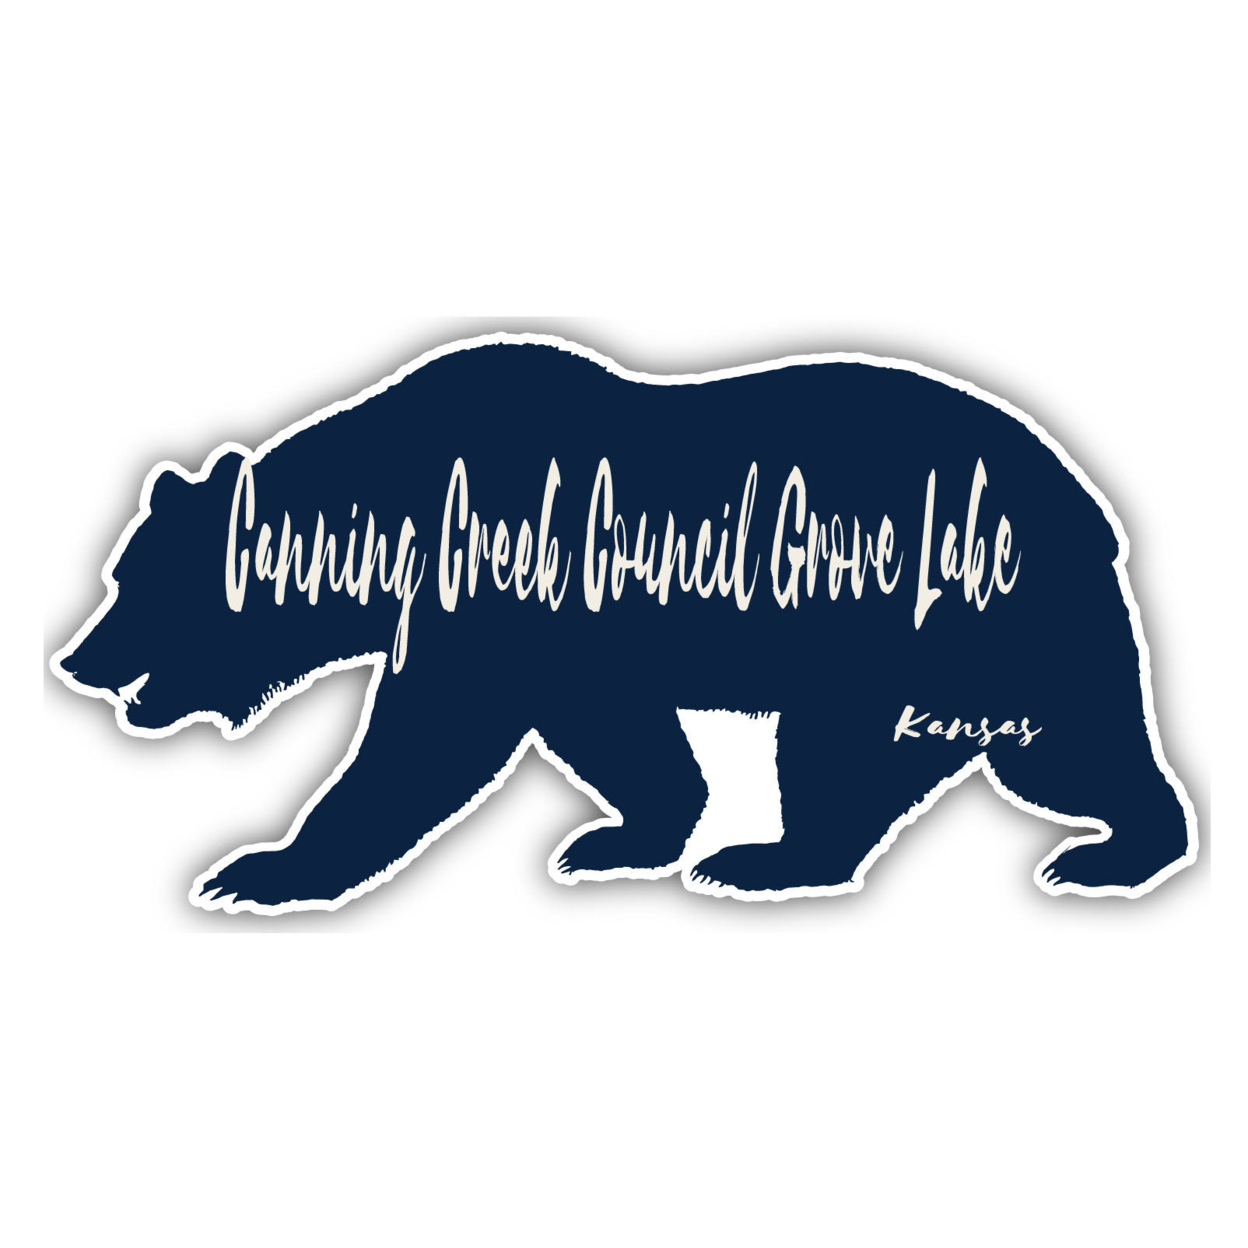 Canning Creek Council Grove Lake Kansas Souvenir Decorative Stickers (Choose Theme And Size) - 4-Pack, 10-Inch, Bear